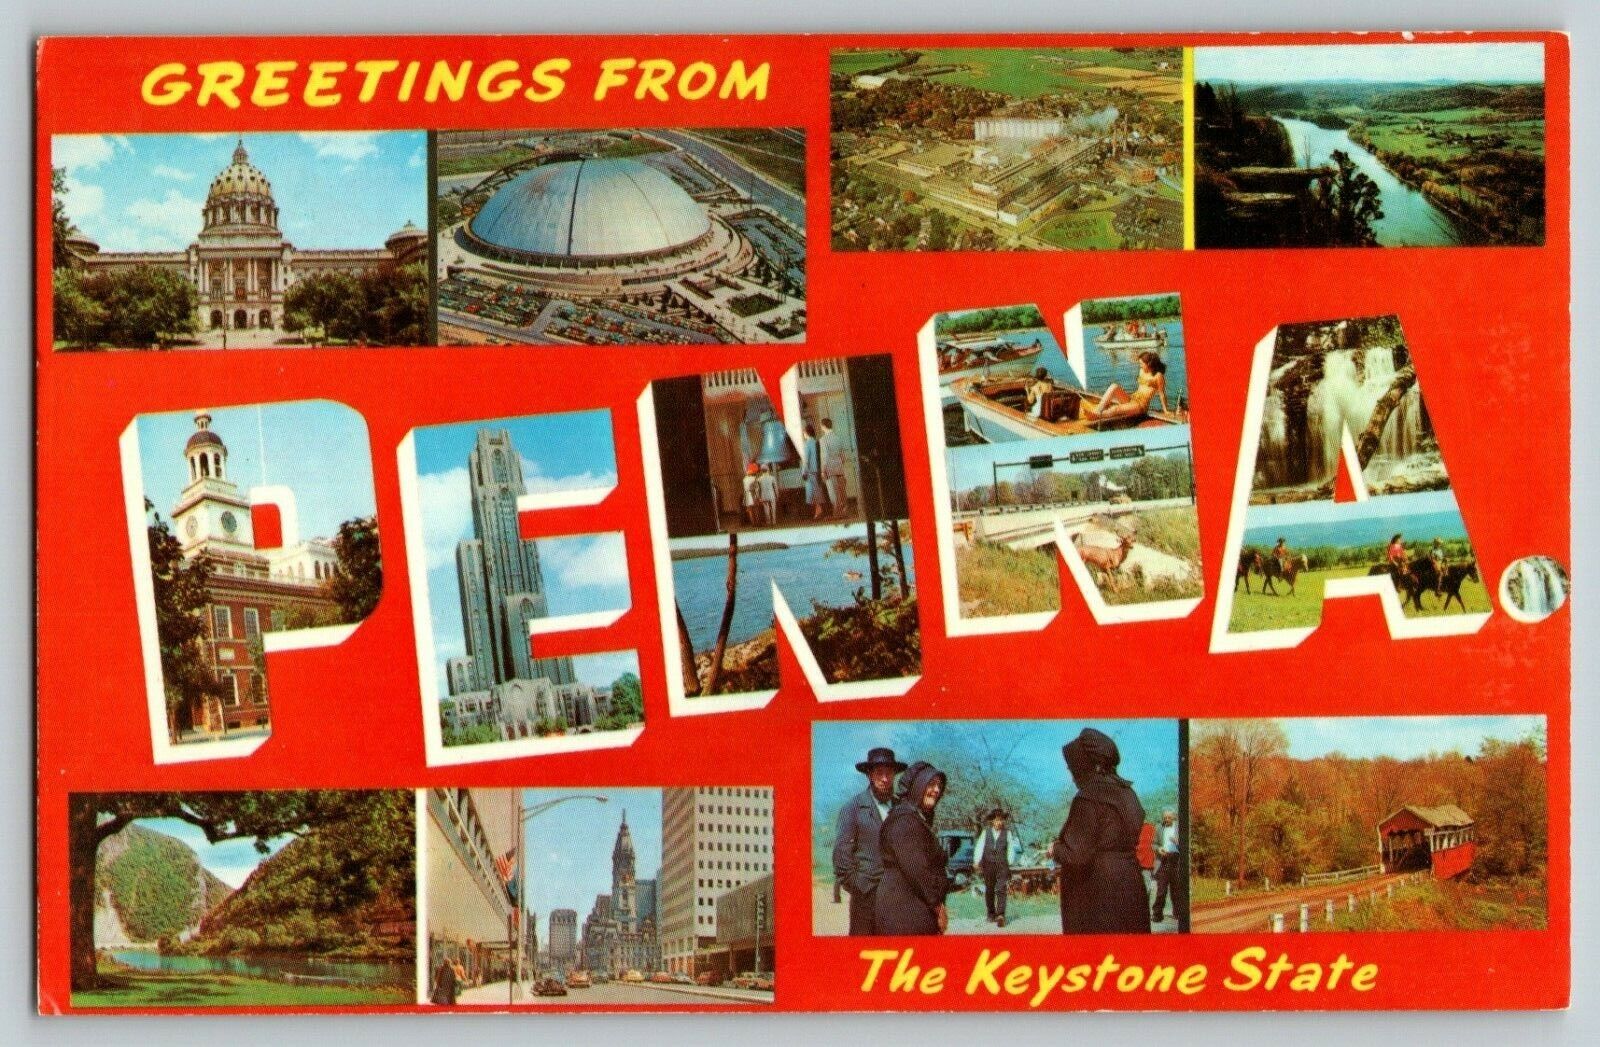 VTG Chrome PA Greetings from Pennsylvania Postcard Attractions